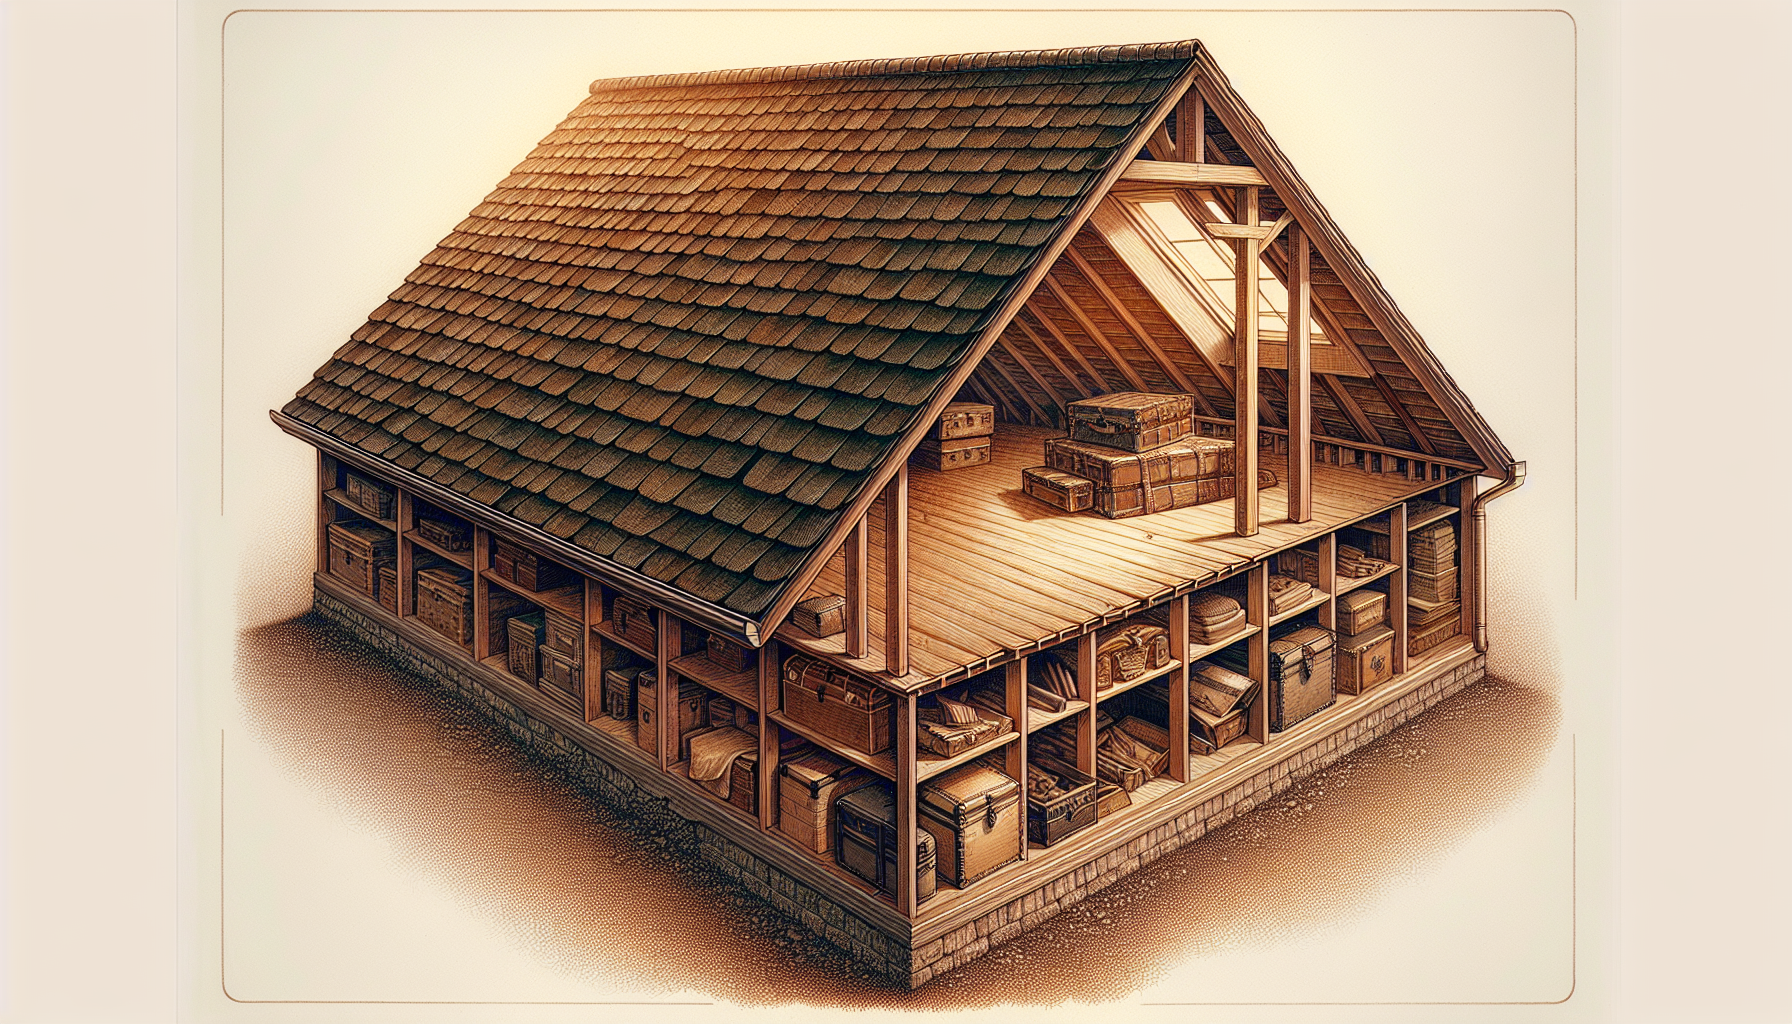 Illustration of a residential roofing structure